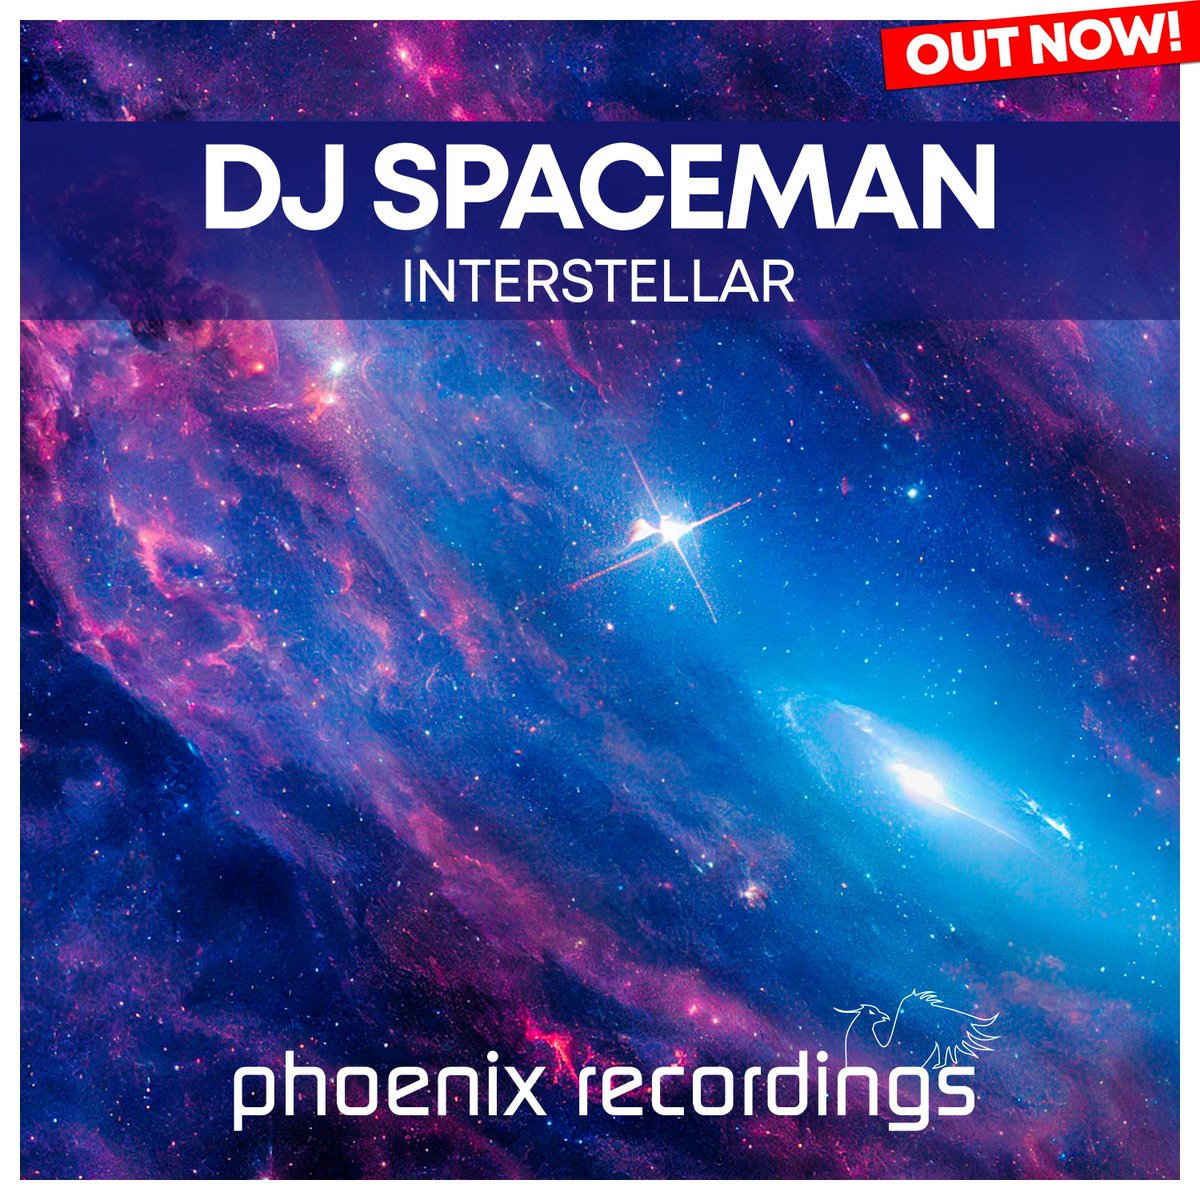 🆕 @DJ_Spaceman_CH « Interstellar » ✨ @beatport exclusive #OutNow 🎧NIX.lnk.to/Interstellar2 DJ Spaceman 🇨🇭 joins our collective with his label debut #Interstellar, a powerful out-of-this-world #Trance uplifter. #upliftingtrance #newrelease #trancefamily